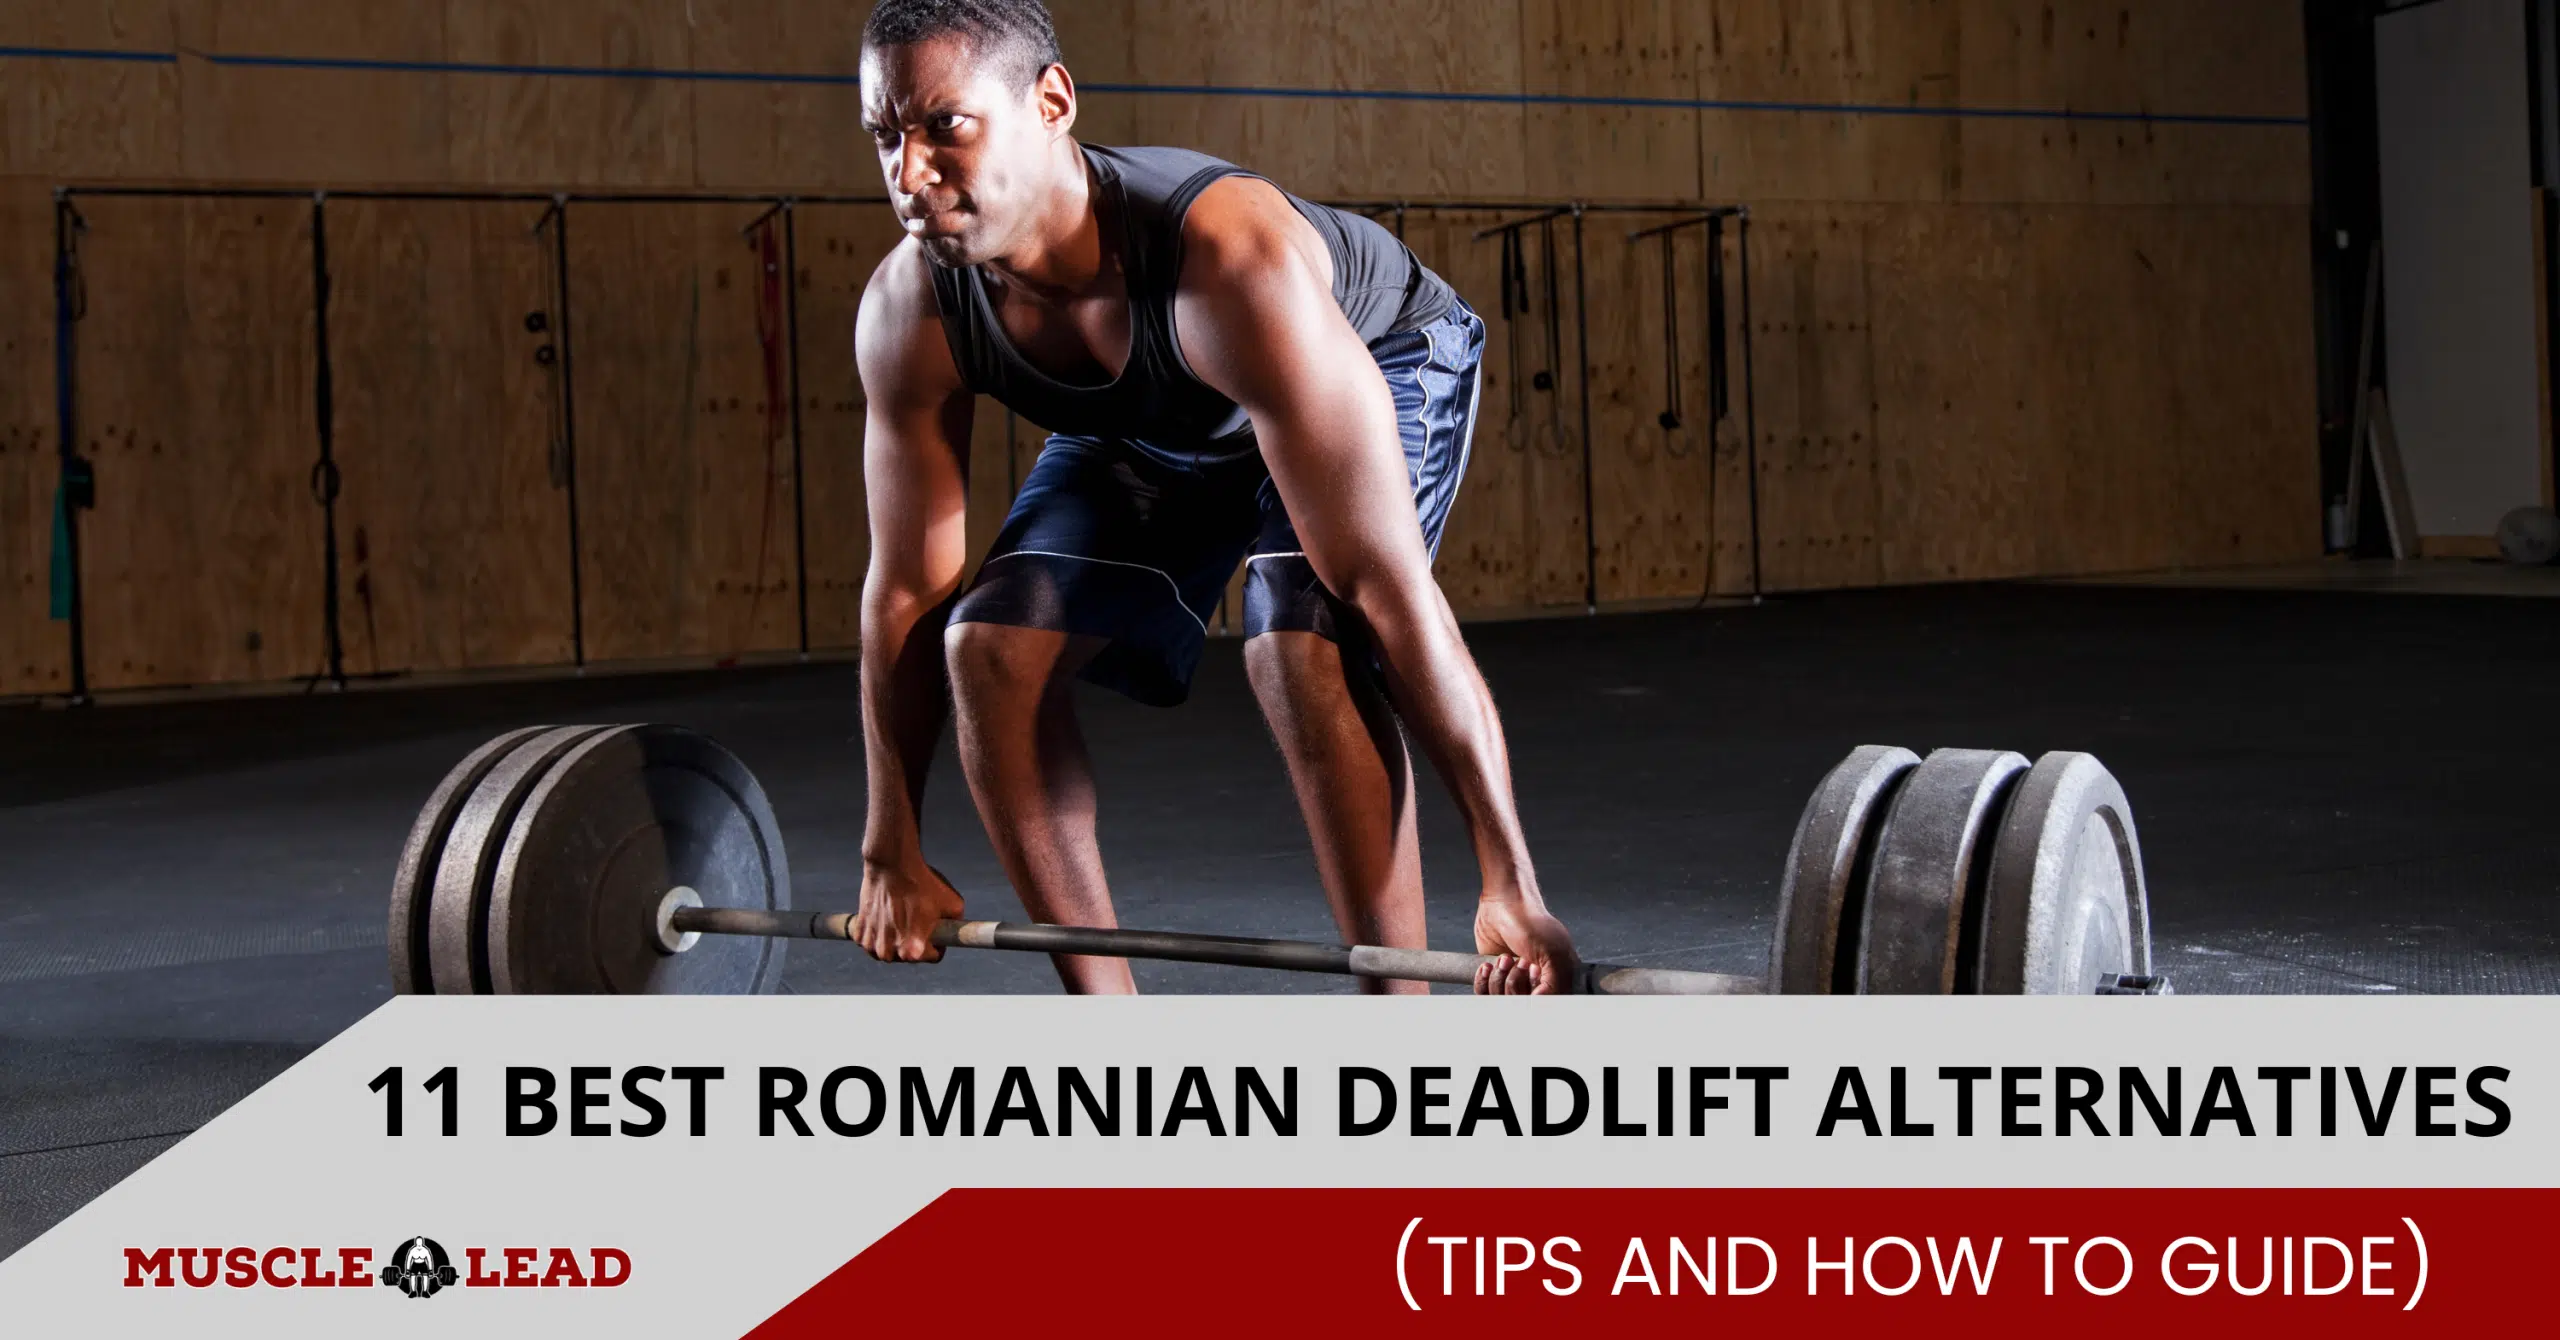 11 Best Romanian Deadlift Alternatives (Tips and How to Guide)